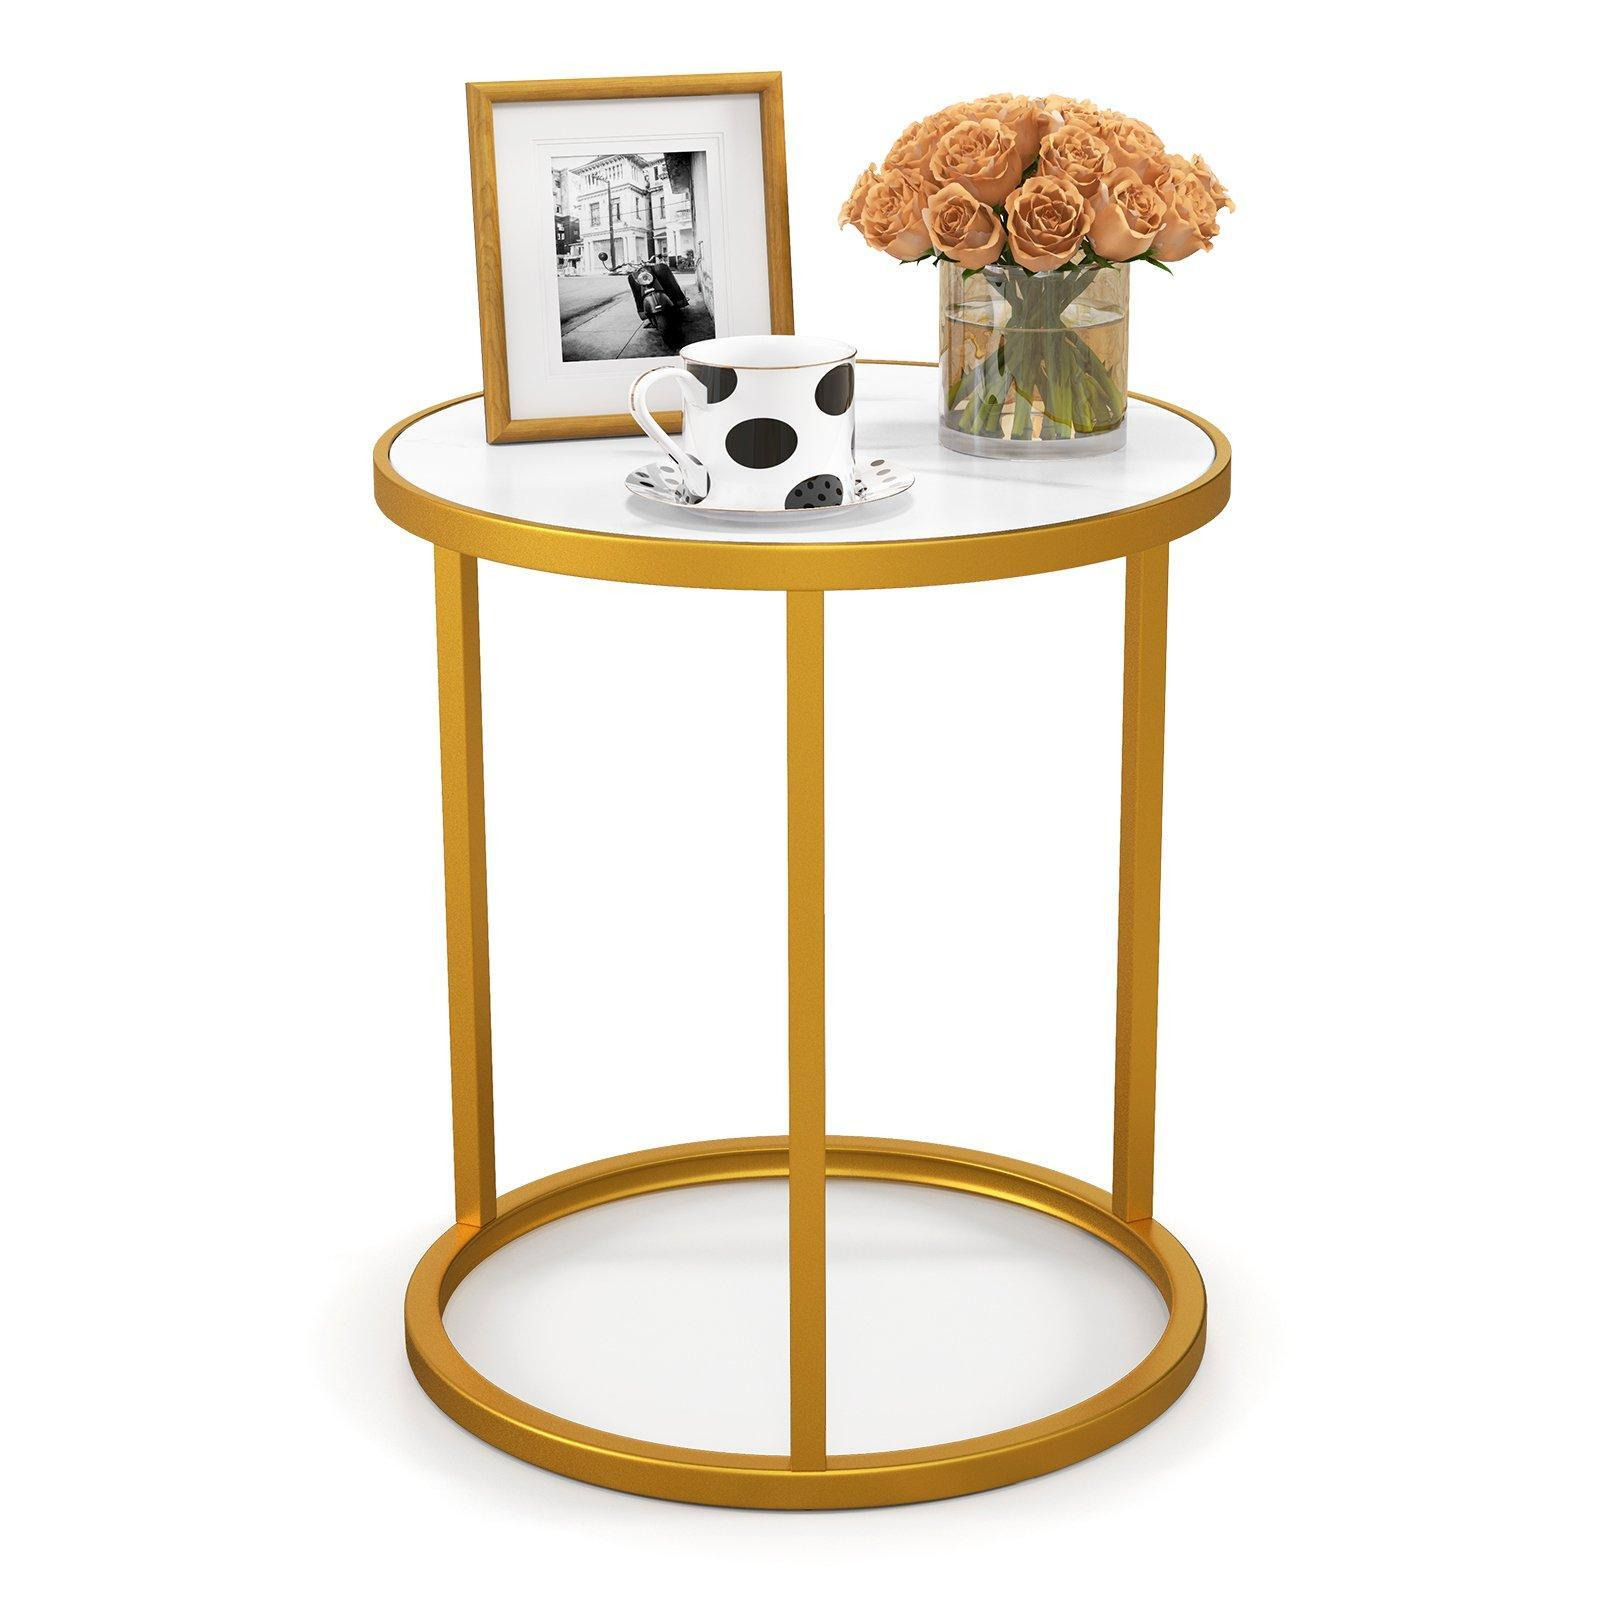 45cm Tall Marble Top Round Side Table Modern Sofa End Table Home Accent Bedside Table - image 1